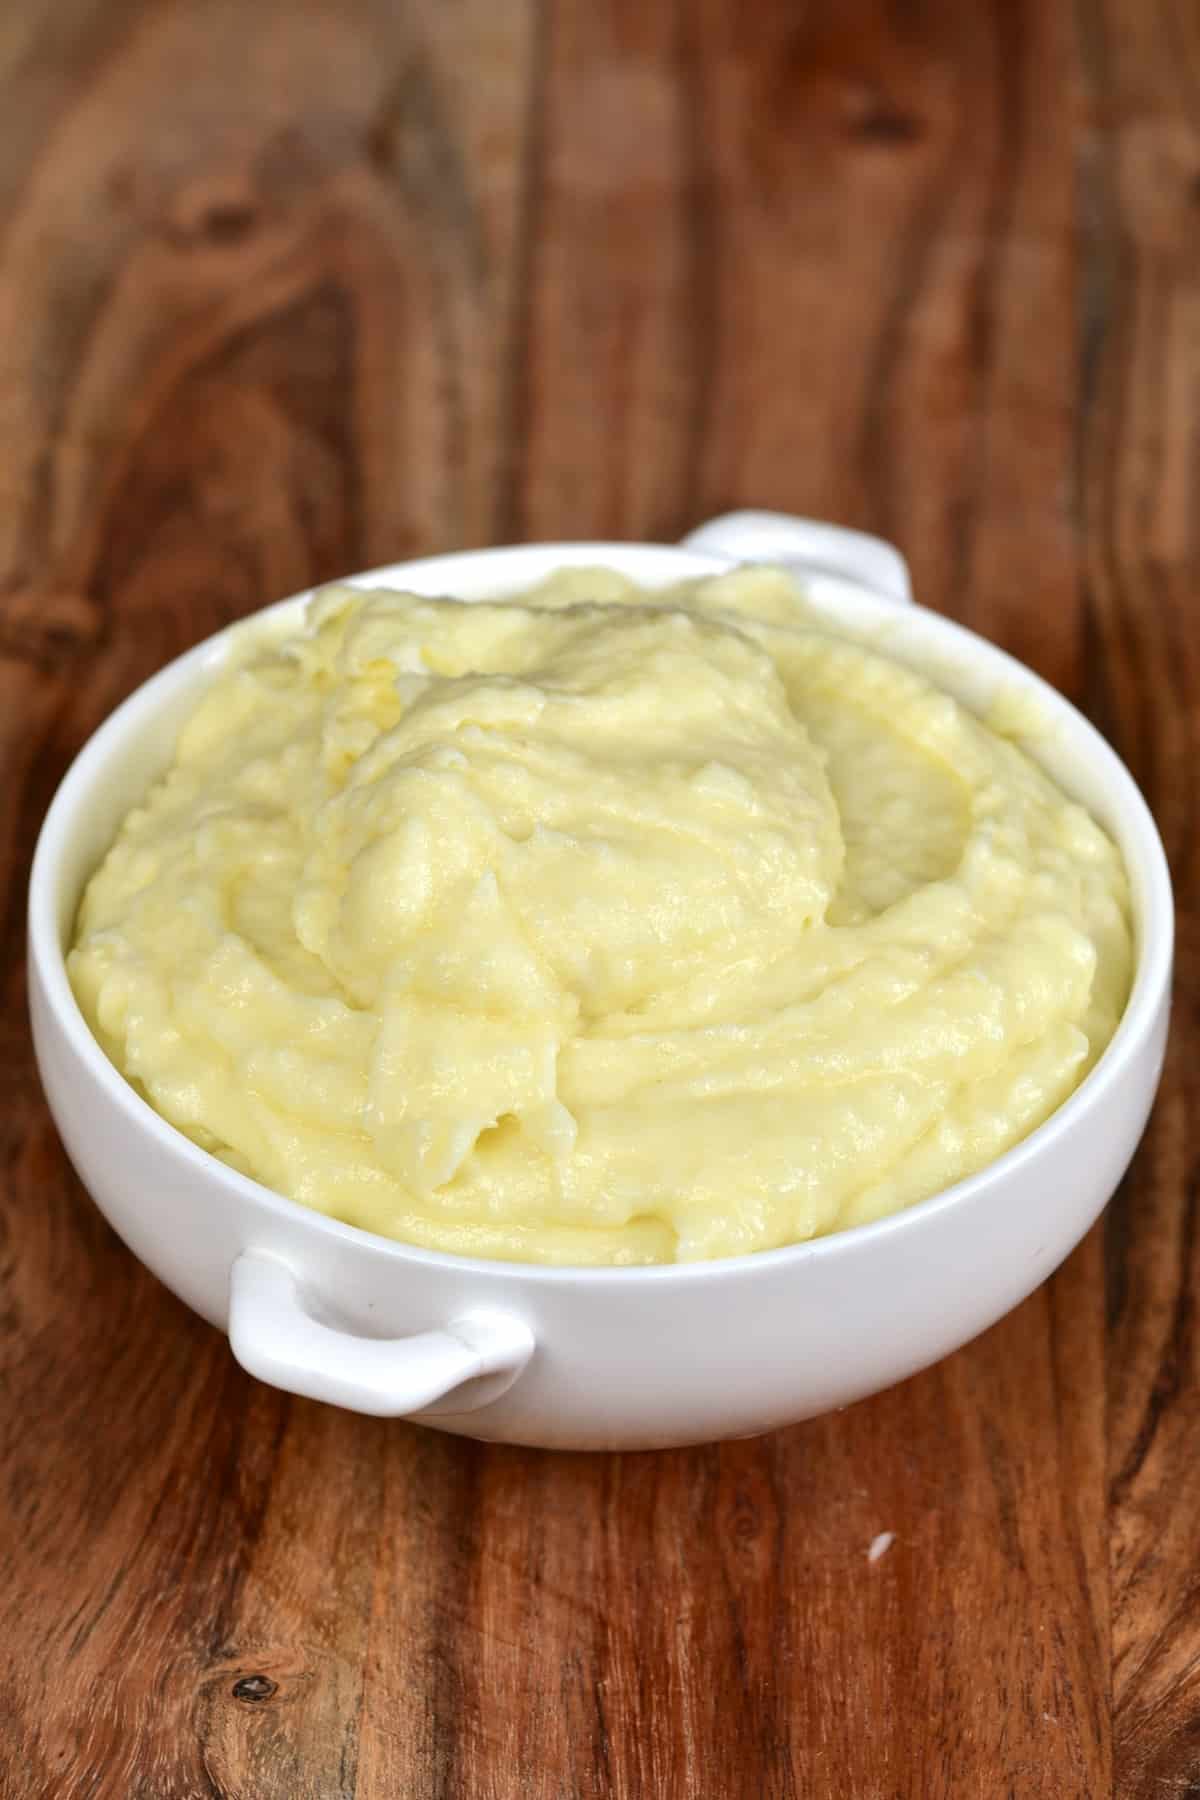 Mashed potatoes in a small bowl